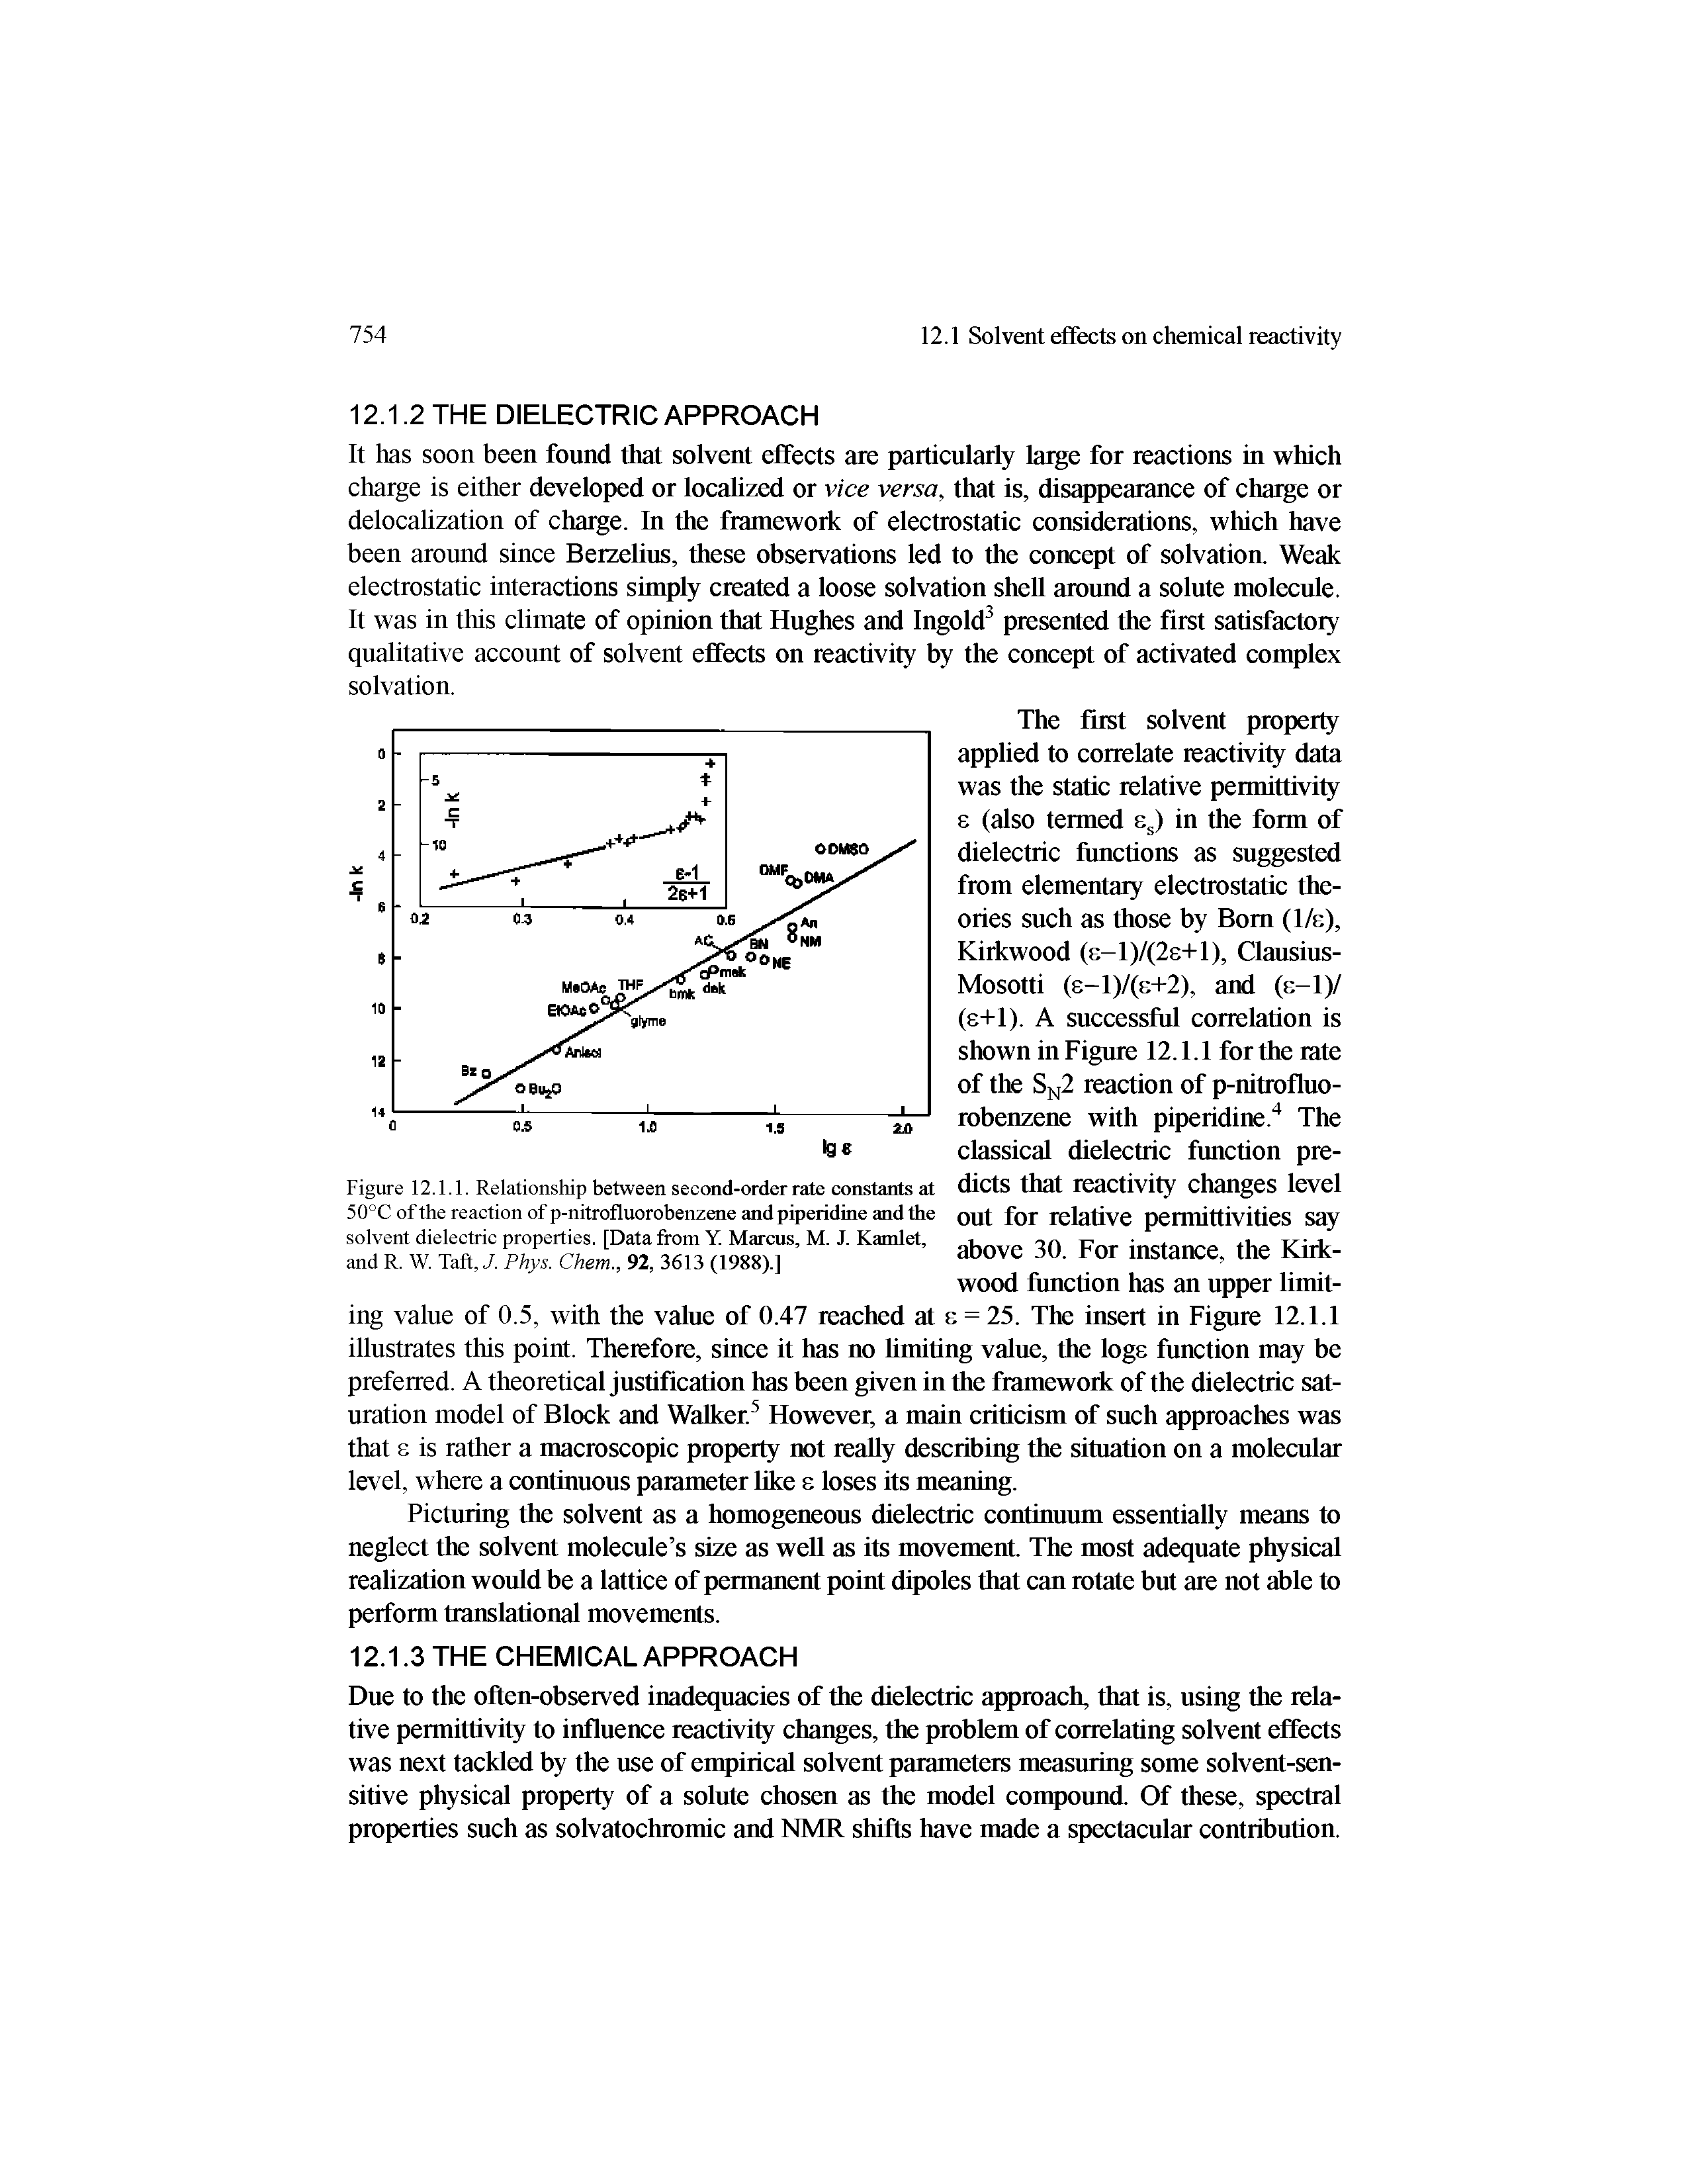 Figure 12.1.1. Relationship between second-order rate constants at 50°C of the reaction of p-nitrofluorobenzene and piperidine and the solvent dielectric properties. [Data from Y. Marcus, M. J. Kamlet, and R. W. Taft, J. Phys. Chem., 92, 3613 (1988).]...